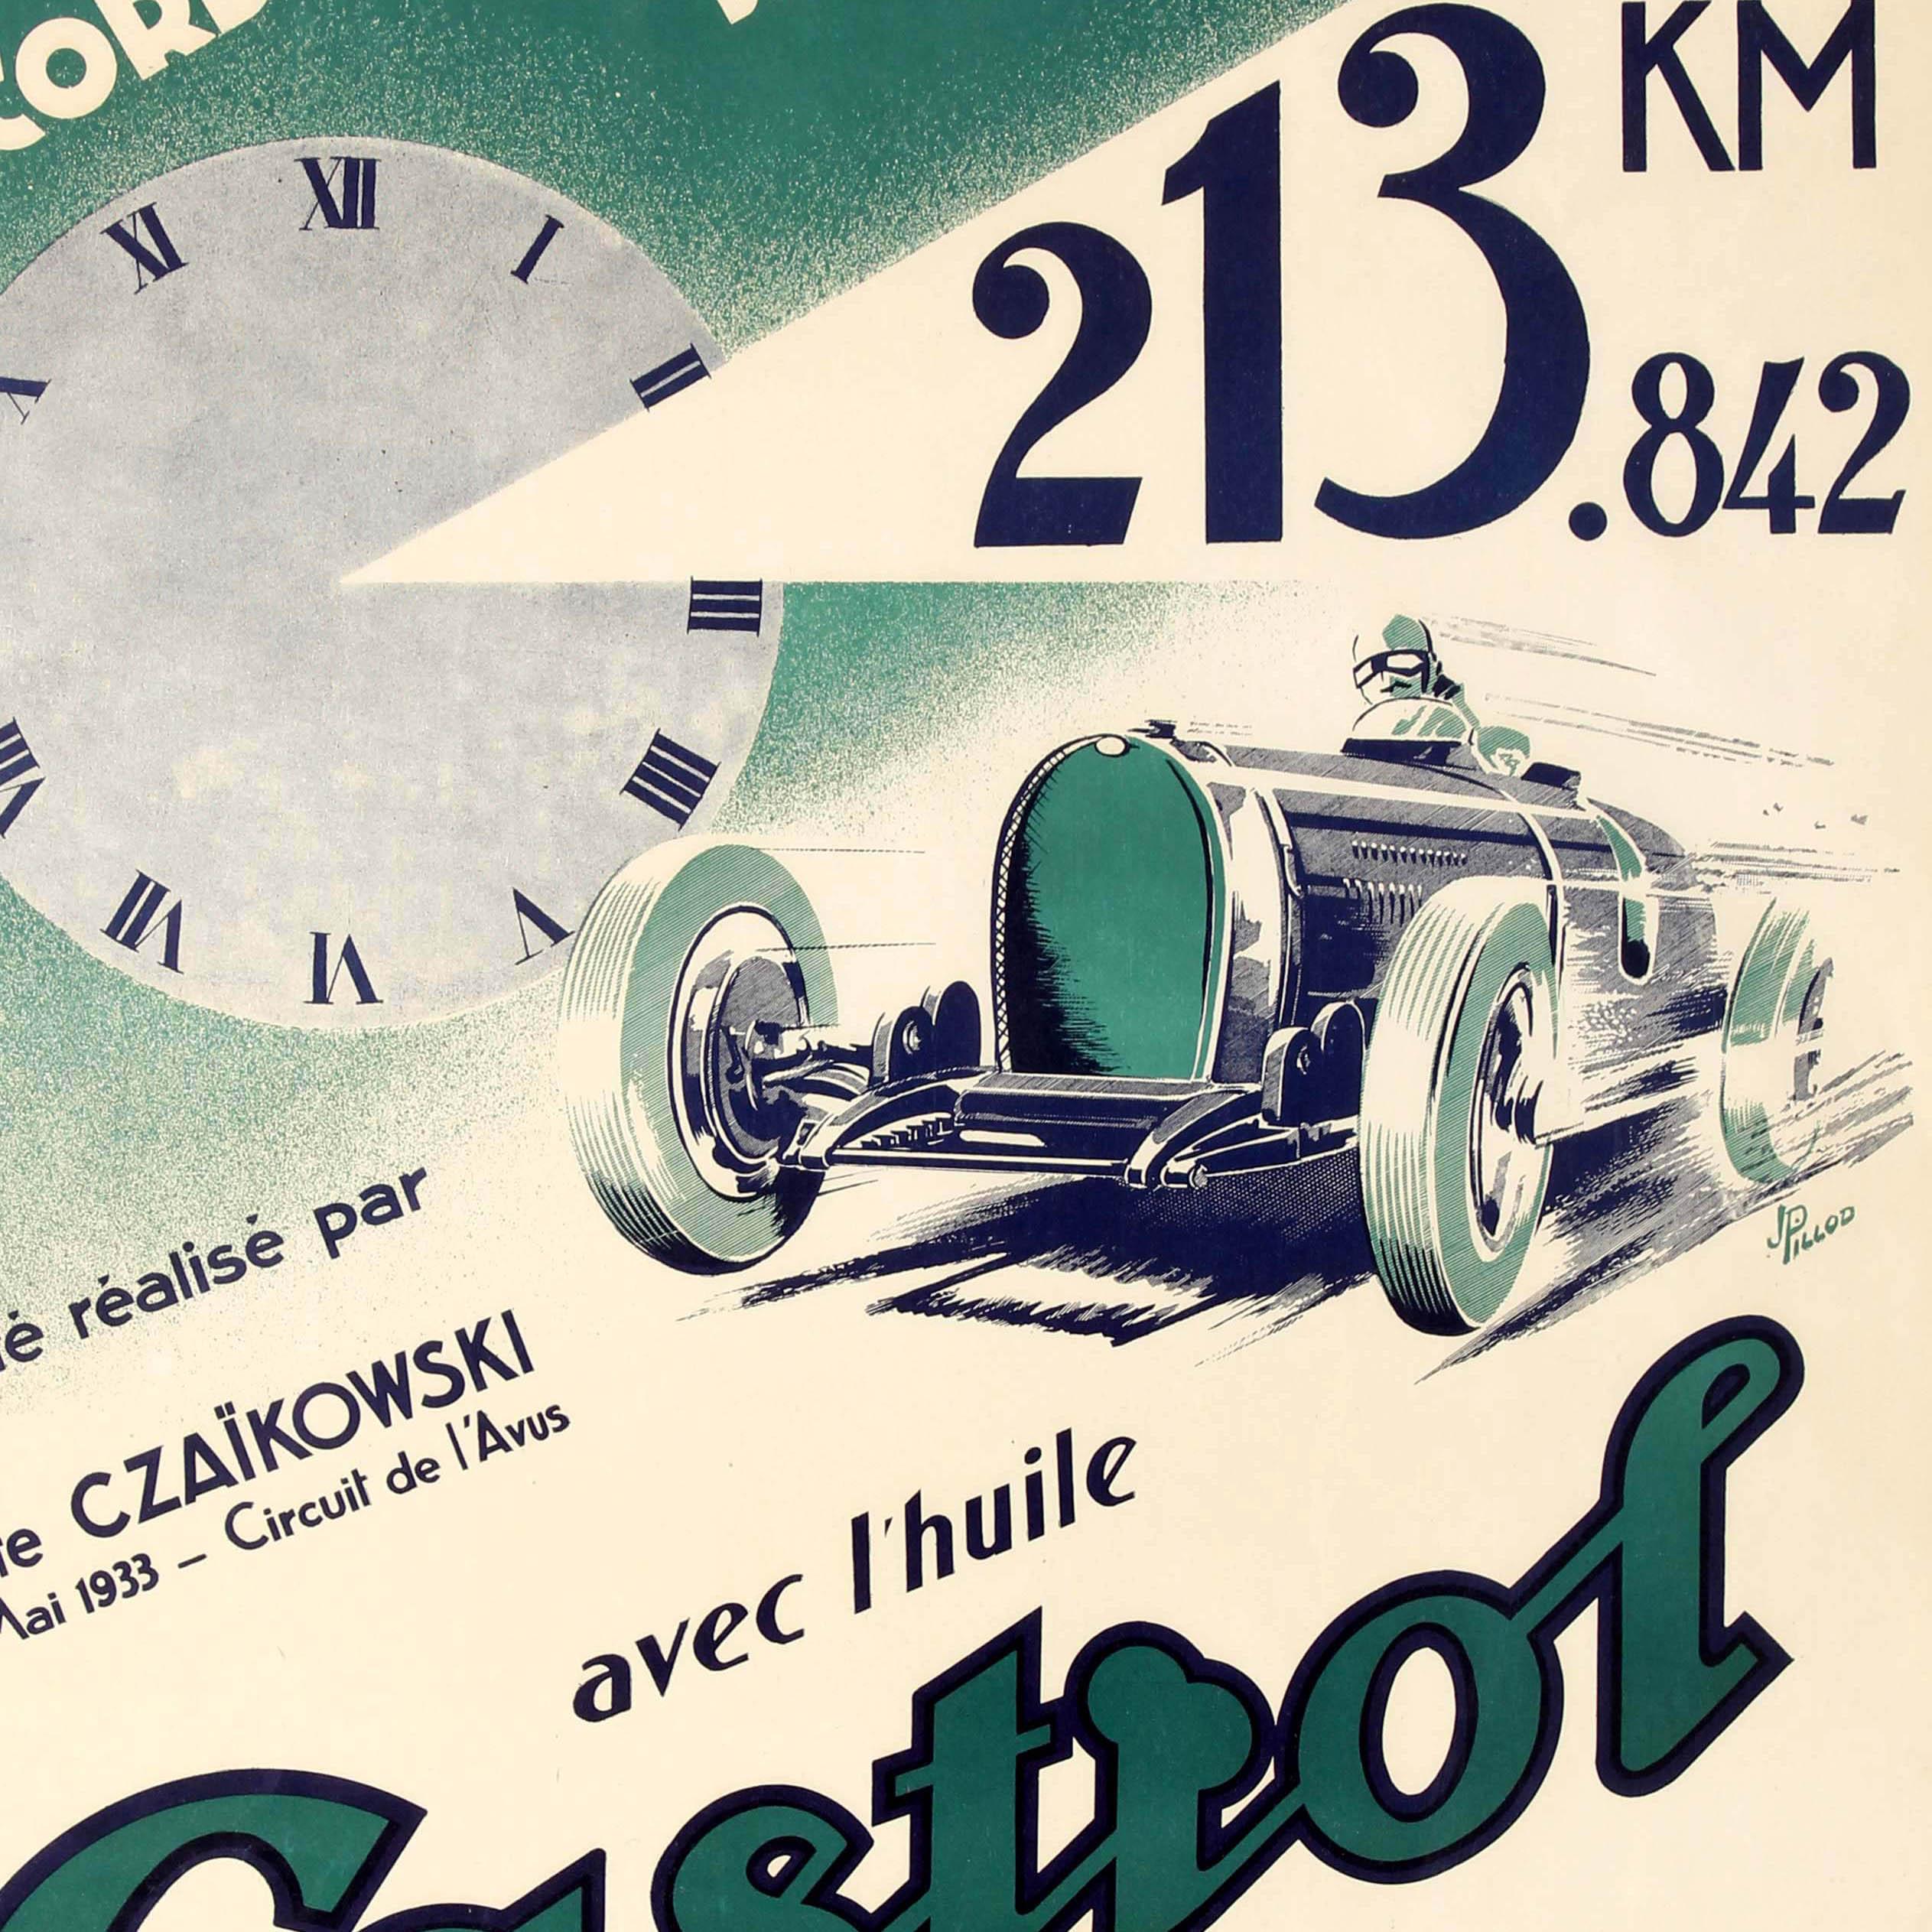 Original vintage motor racing poster published to celebrate the new world record achieved by Count Stanislas Czaikowski of Poland on the Avus race track in Berlin on 5 May 1933 in his 4.9 Bugatti car sponsored by Castrol oil. Dynamic illustration in